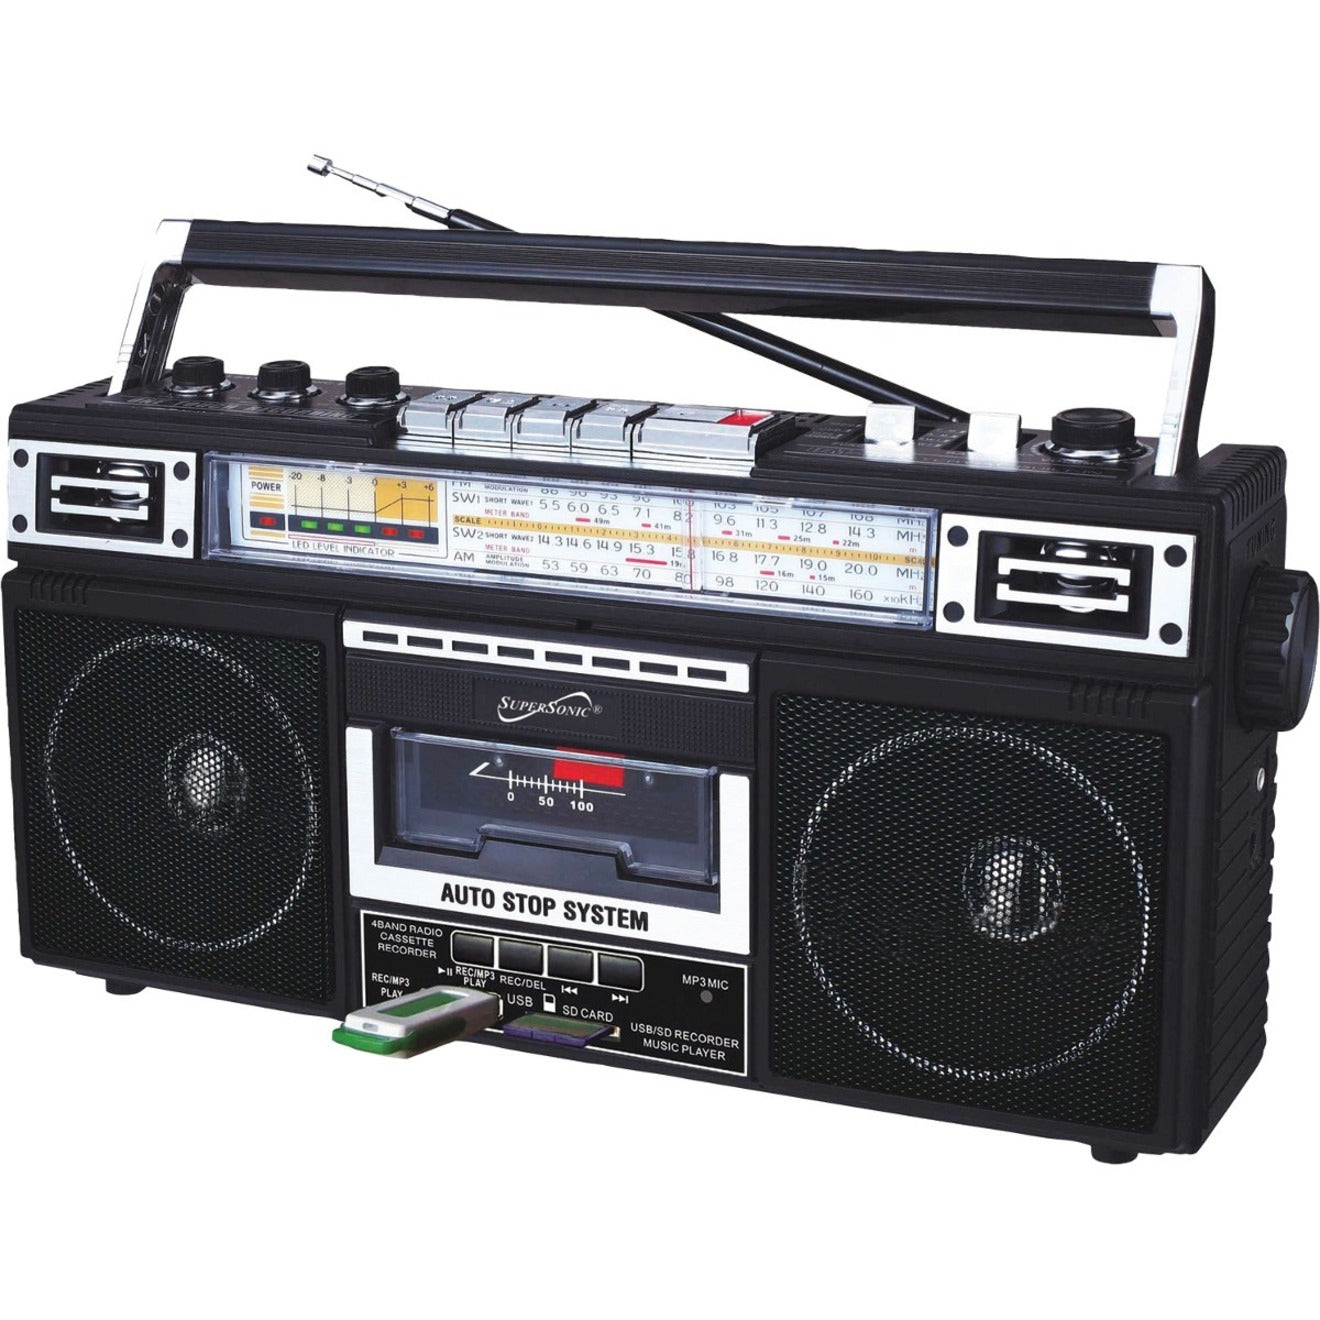 Supersonic SC-3201BT-BK Retro 4-Band Radio and Cassette Player with Bluetooth (Black)